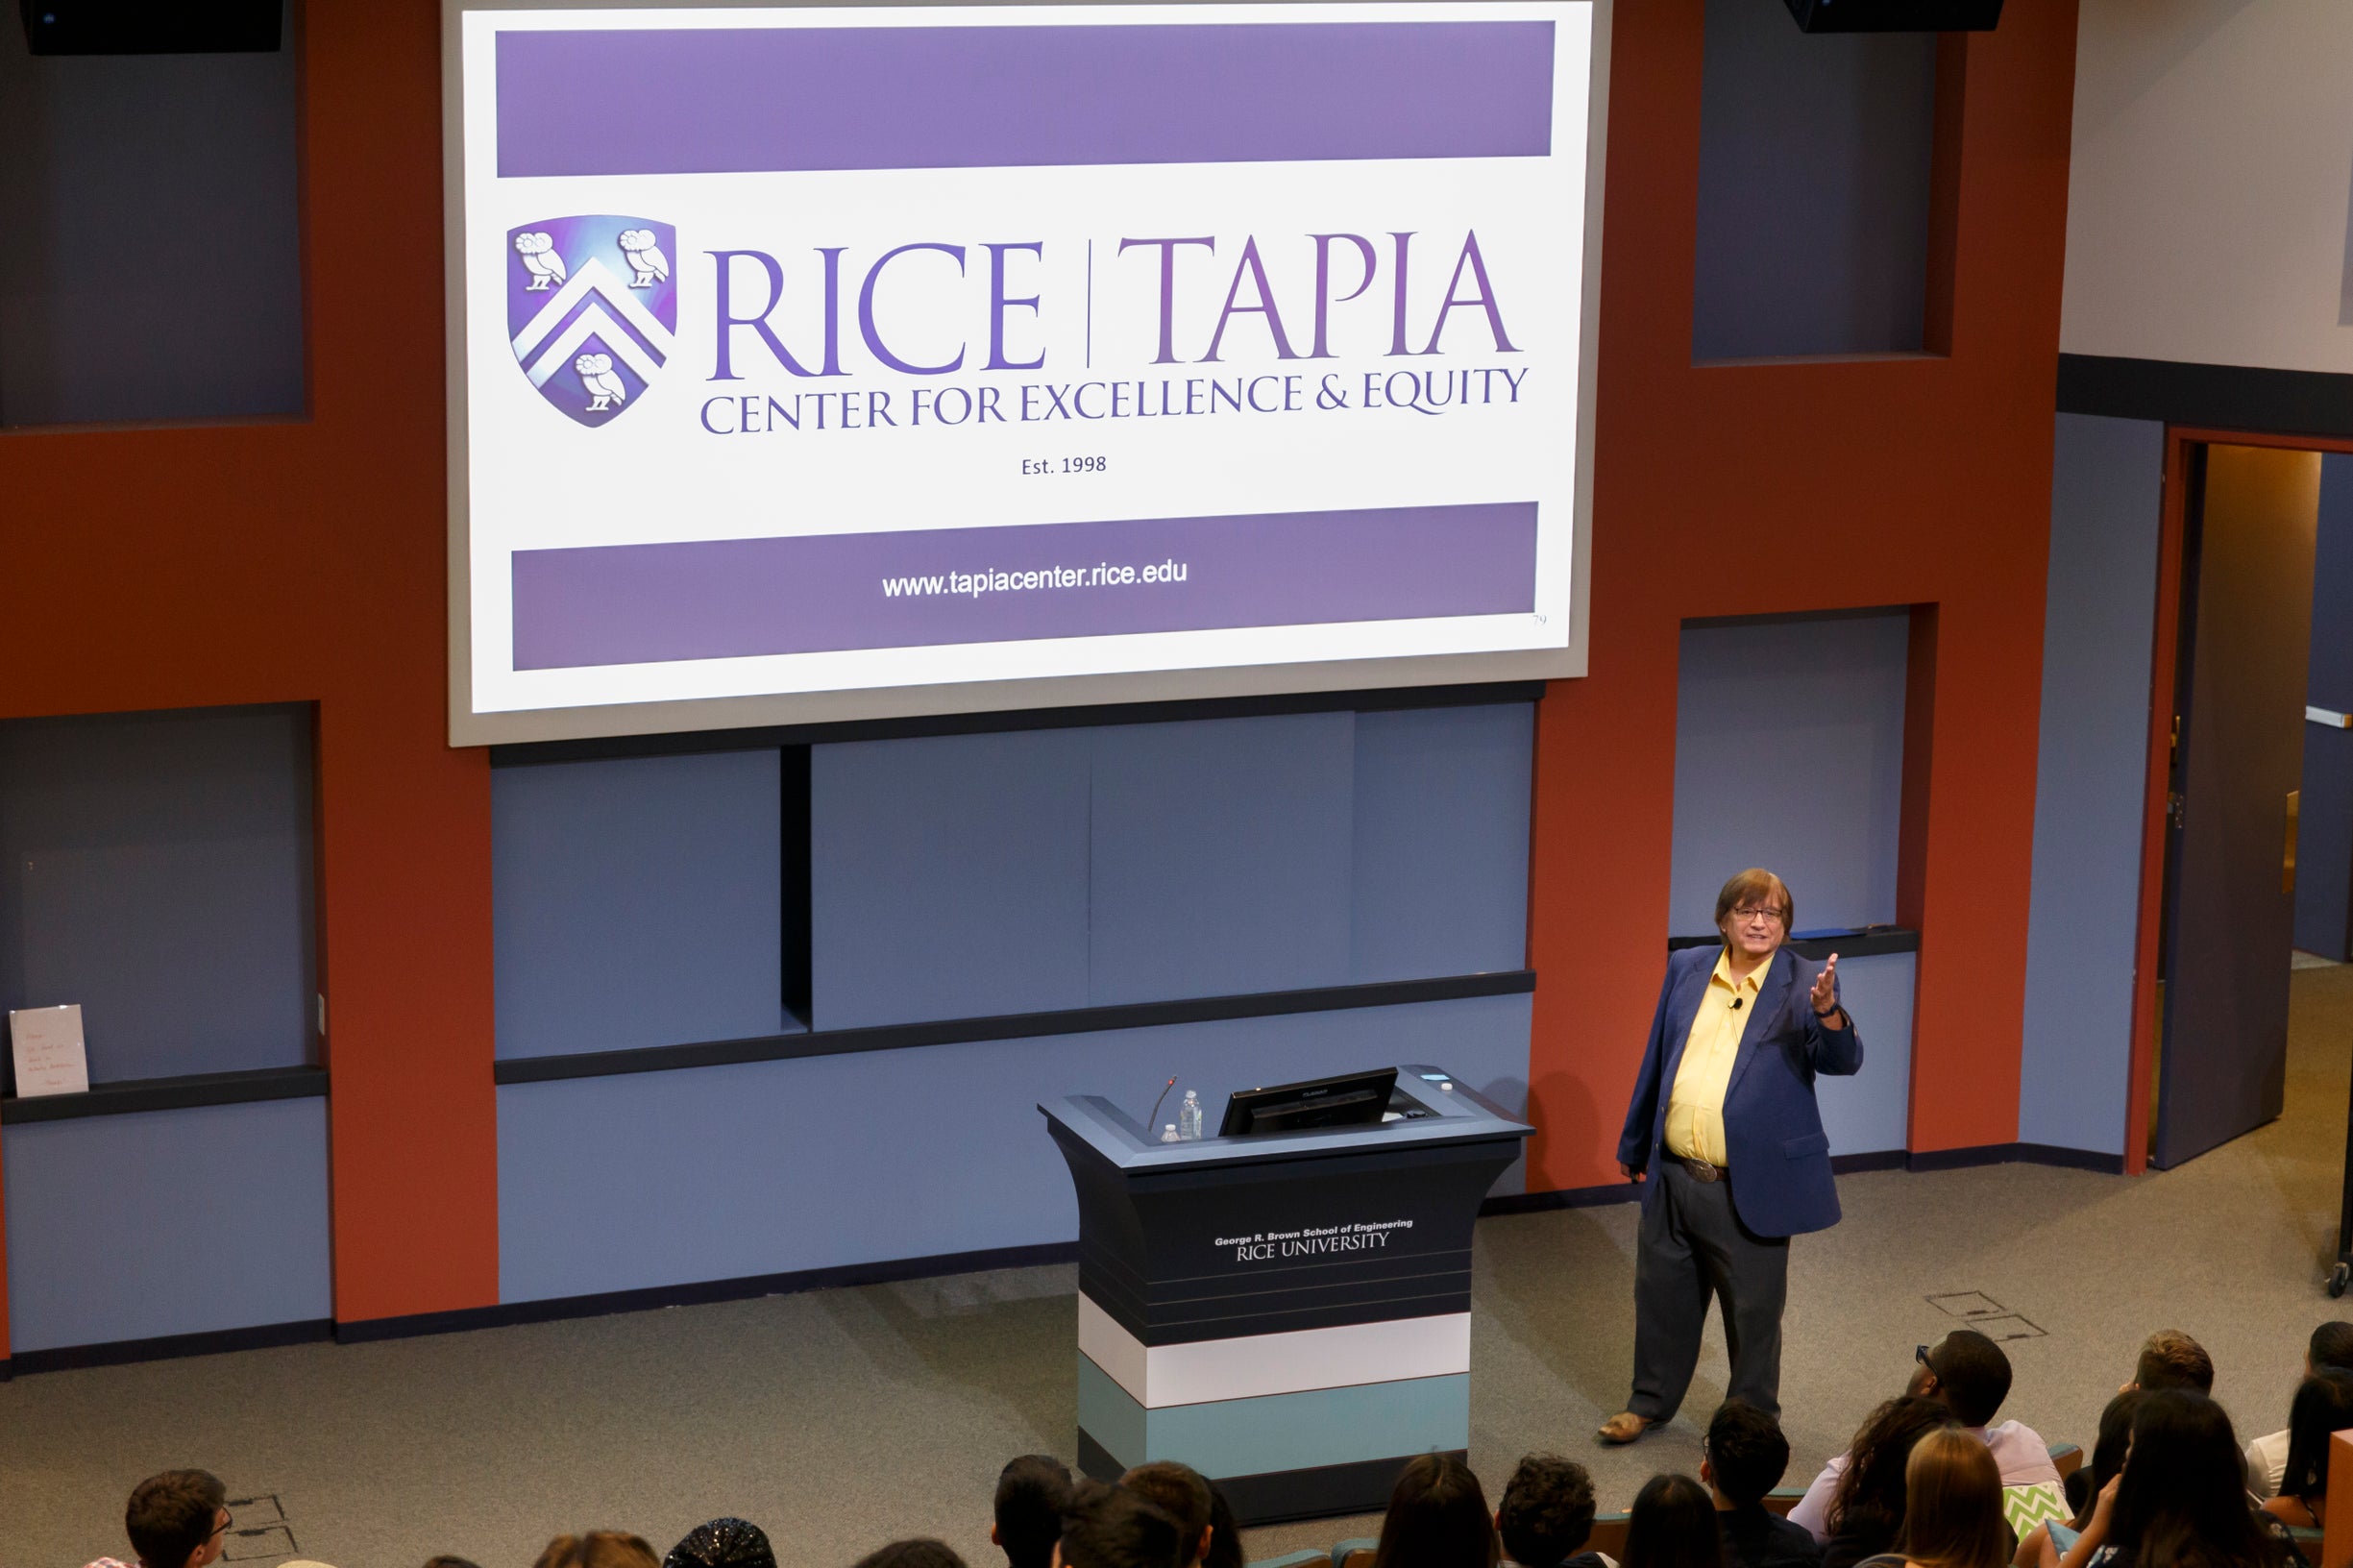 Dr. Tapia giving speech to auditorium with Tapia Center logo on projection screen.